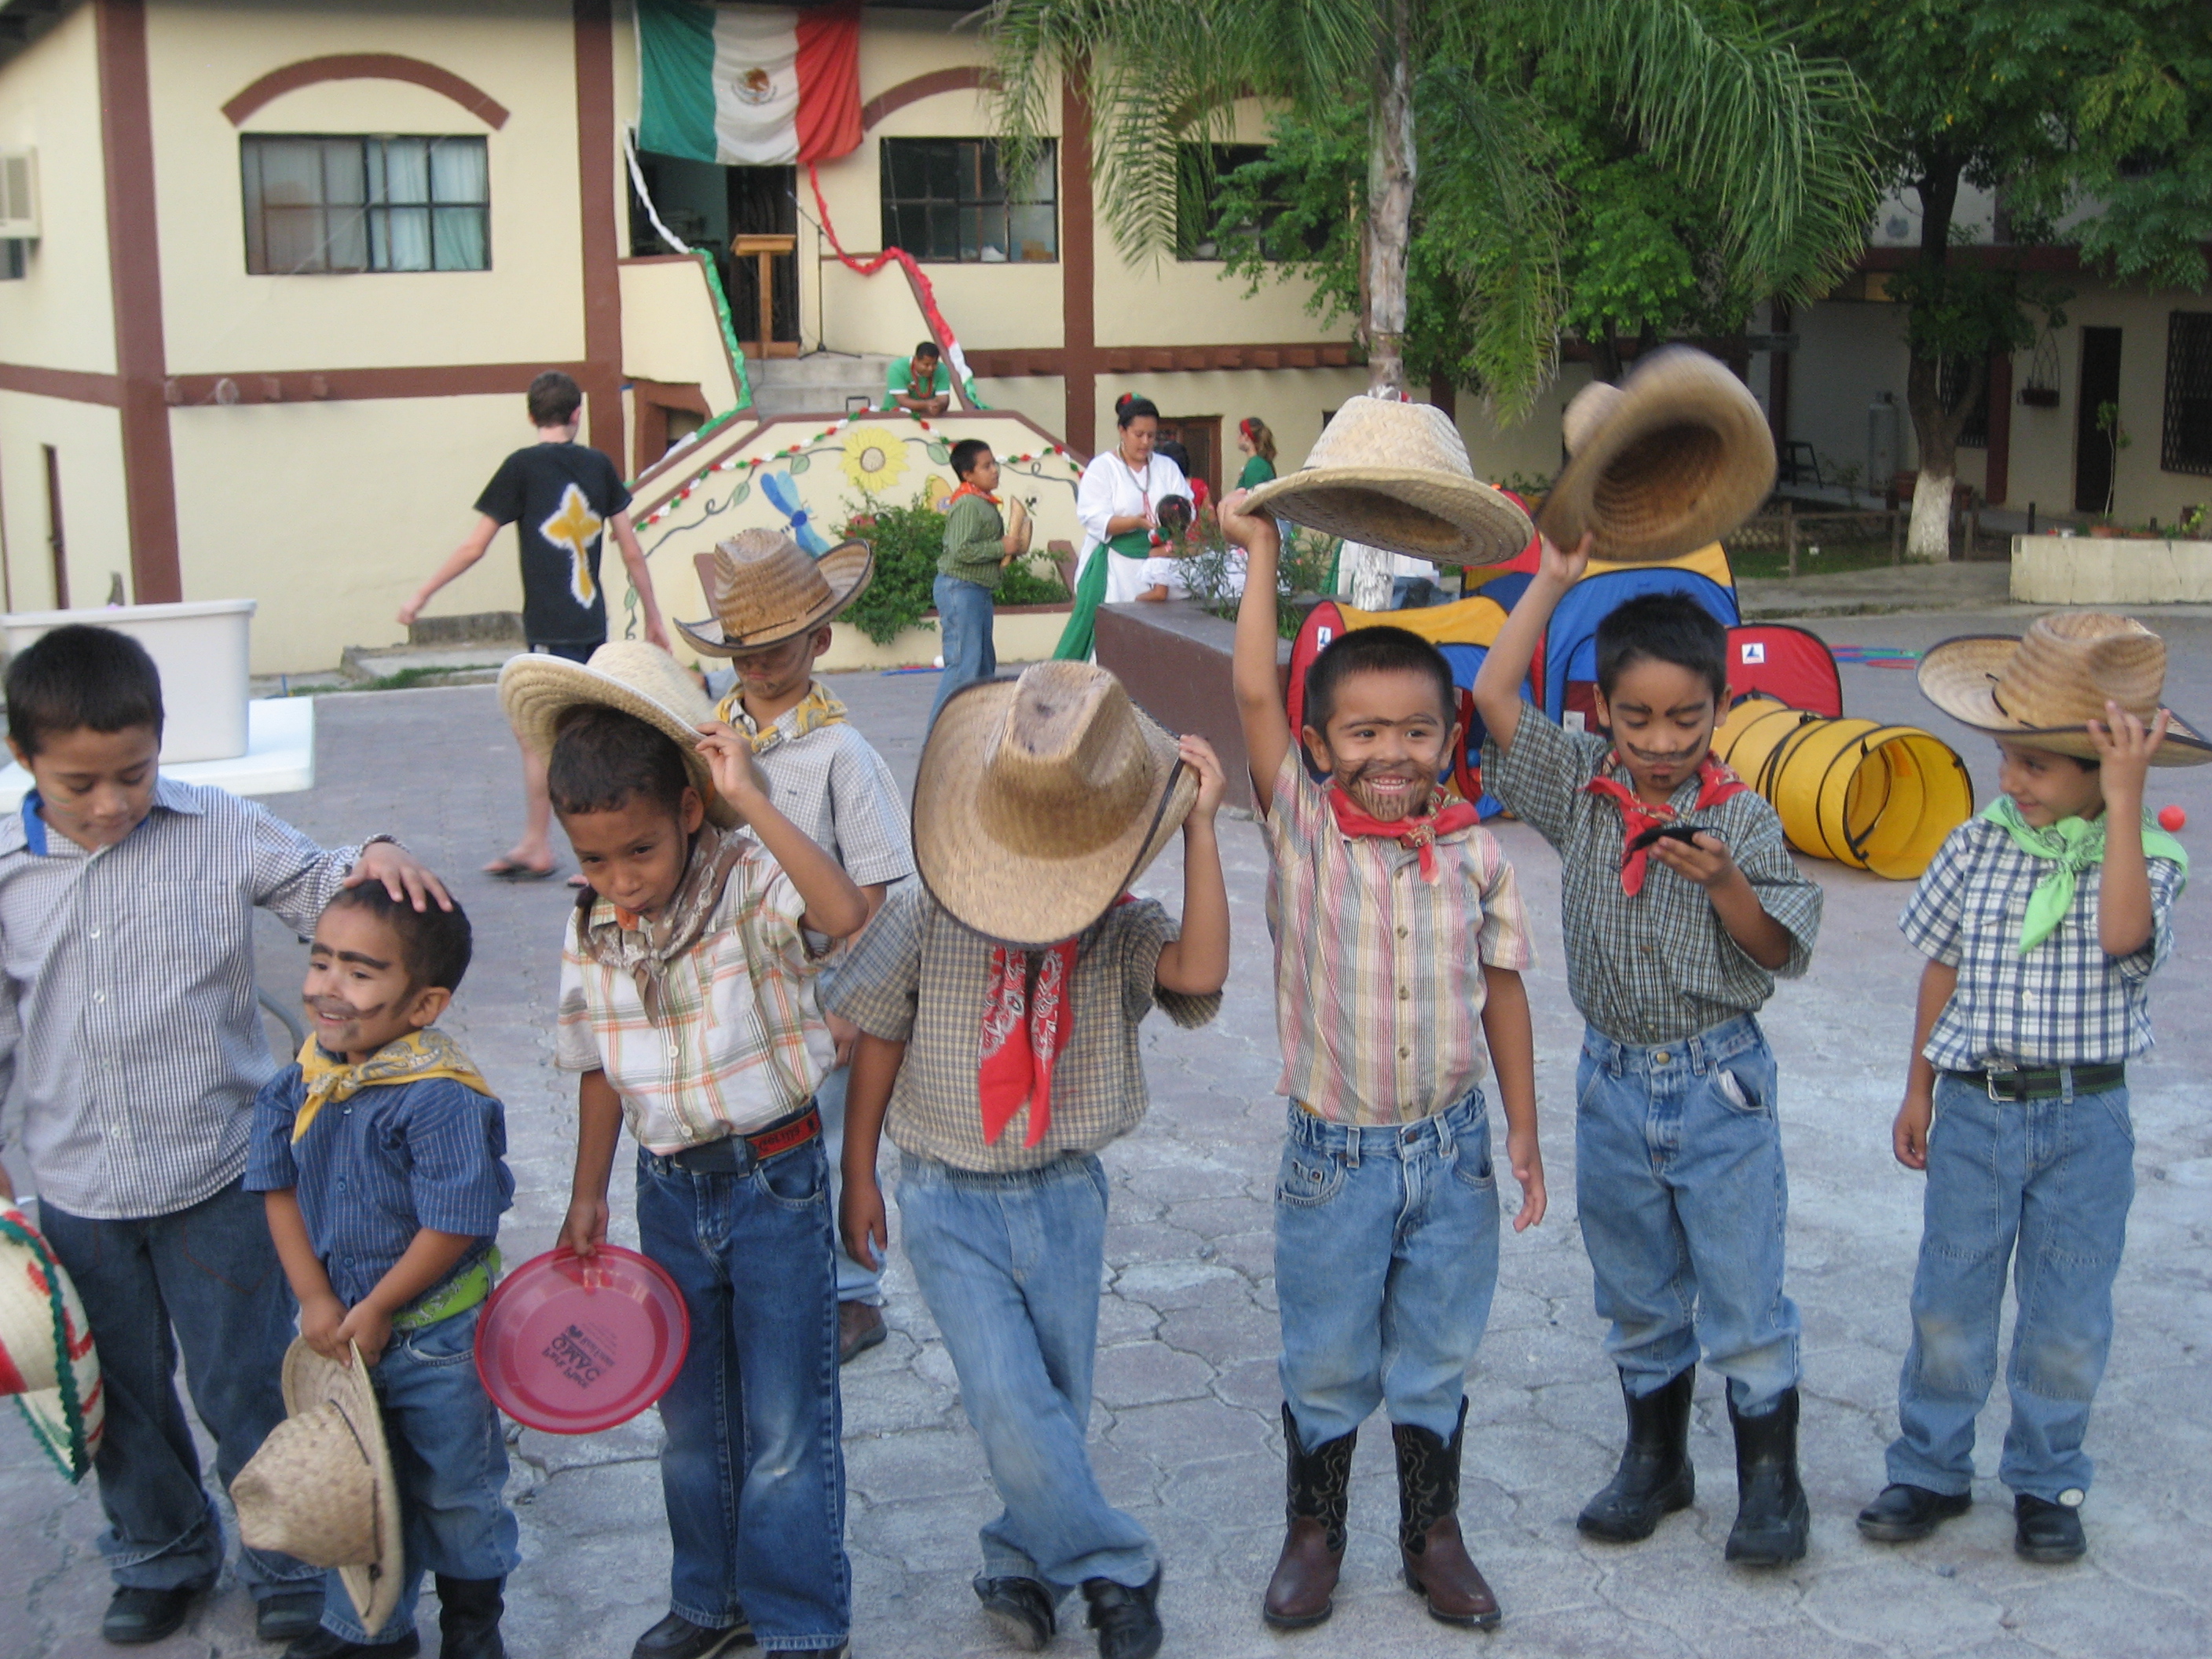 The children dressed up in costumes to celebrate 